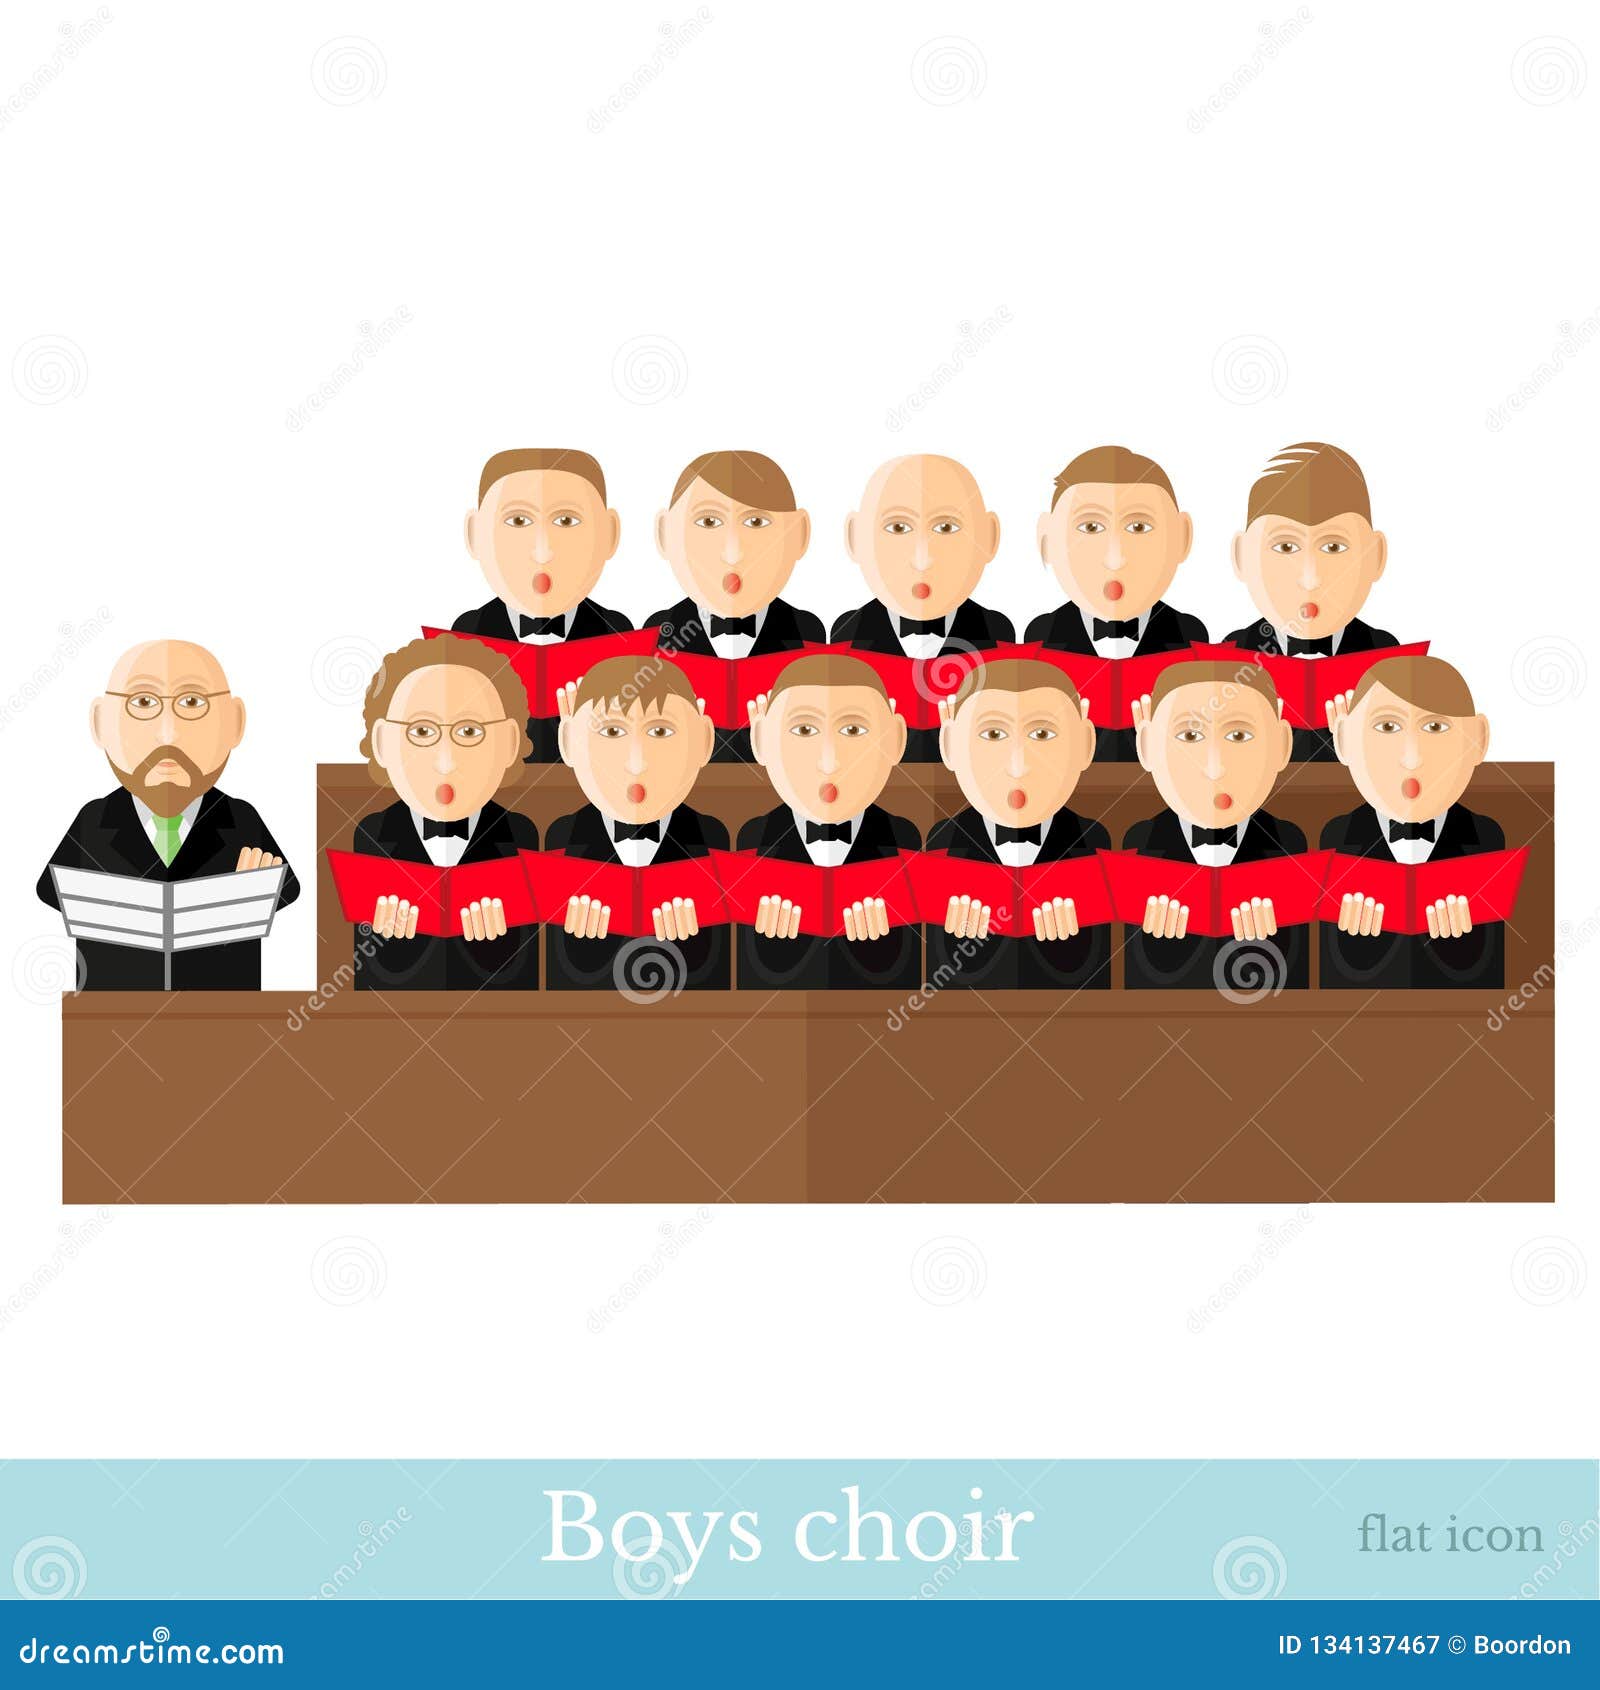 flat style leader and boys choir in two raws with black suits, red cover notes 